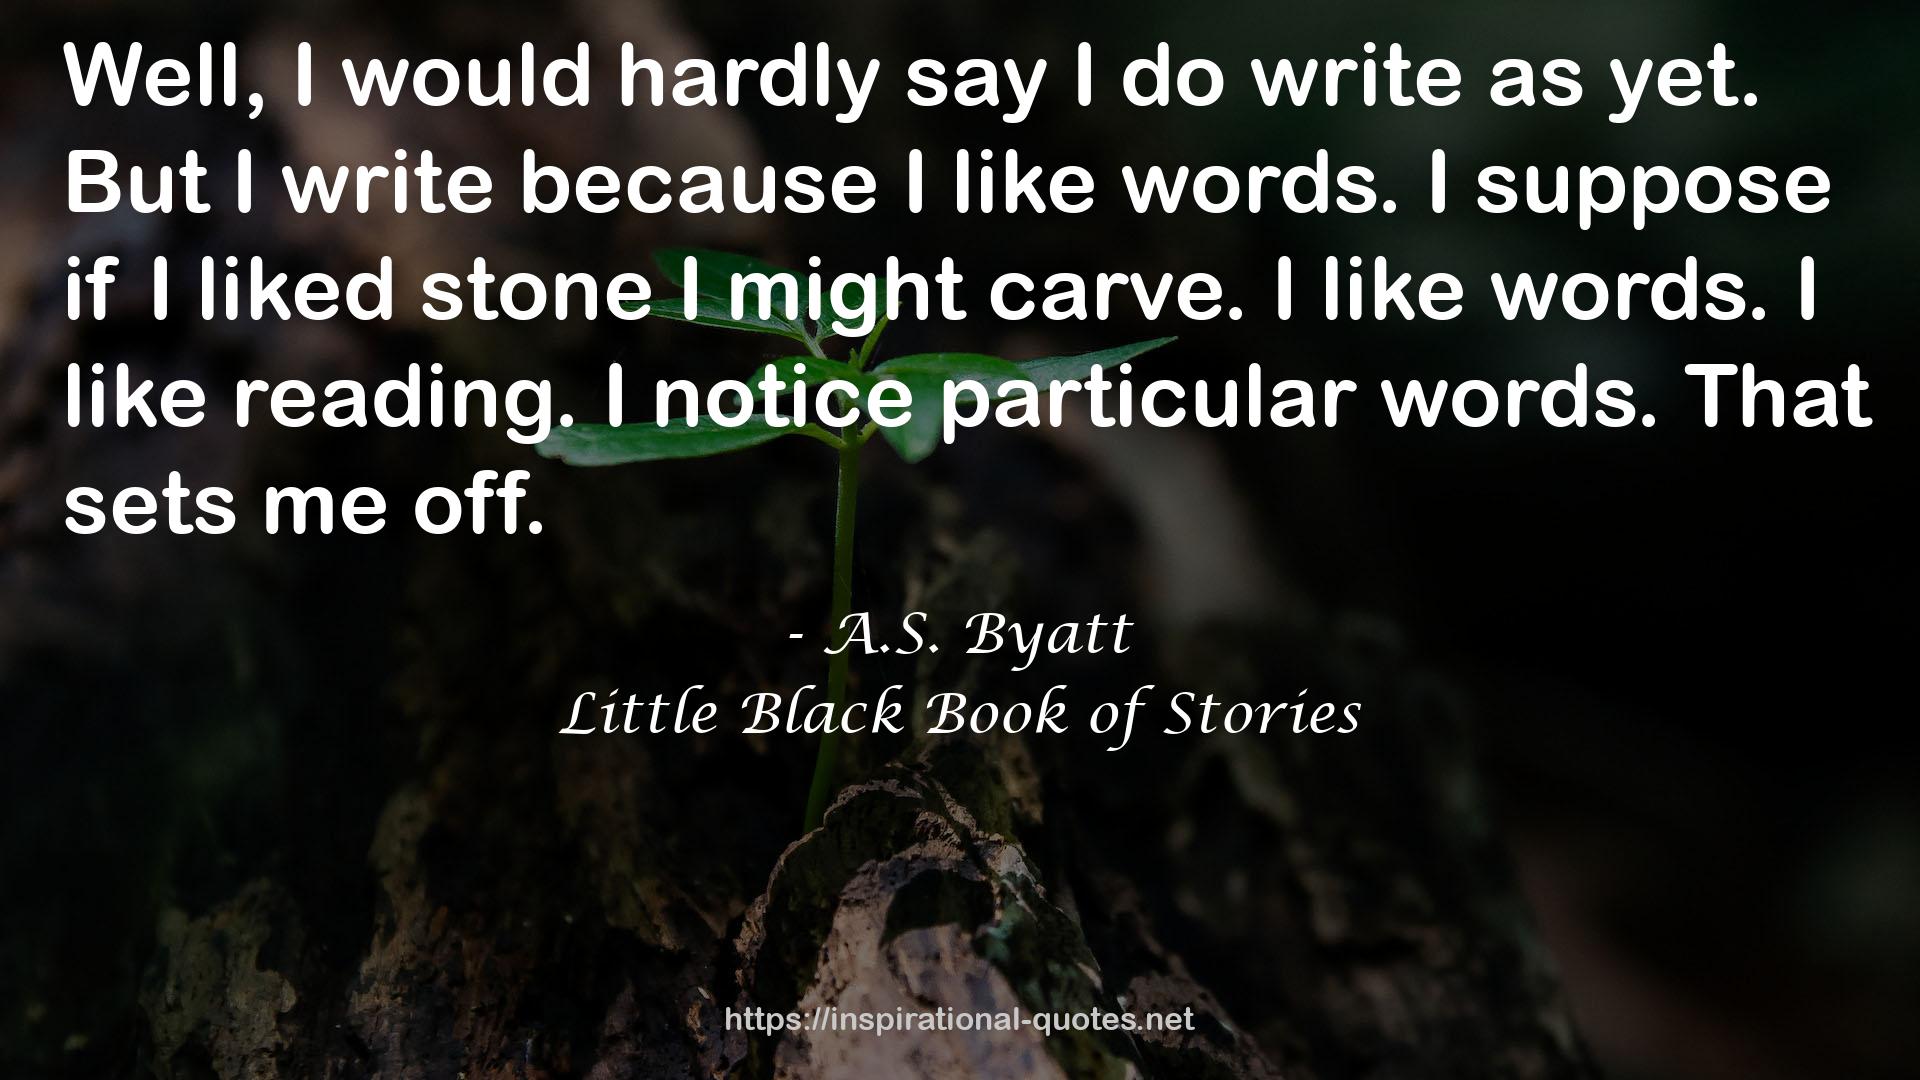 Little Black Book of Stories QUOTES